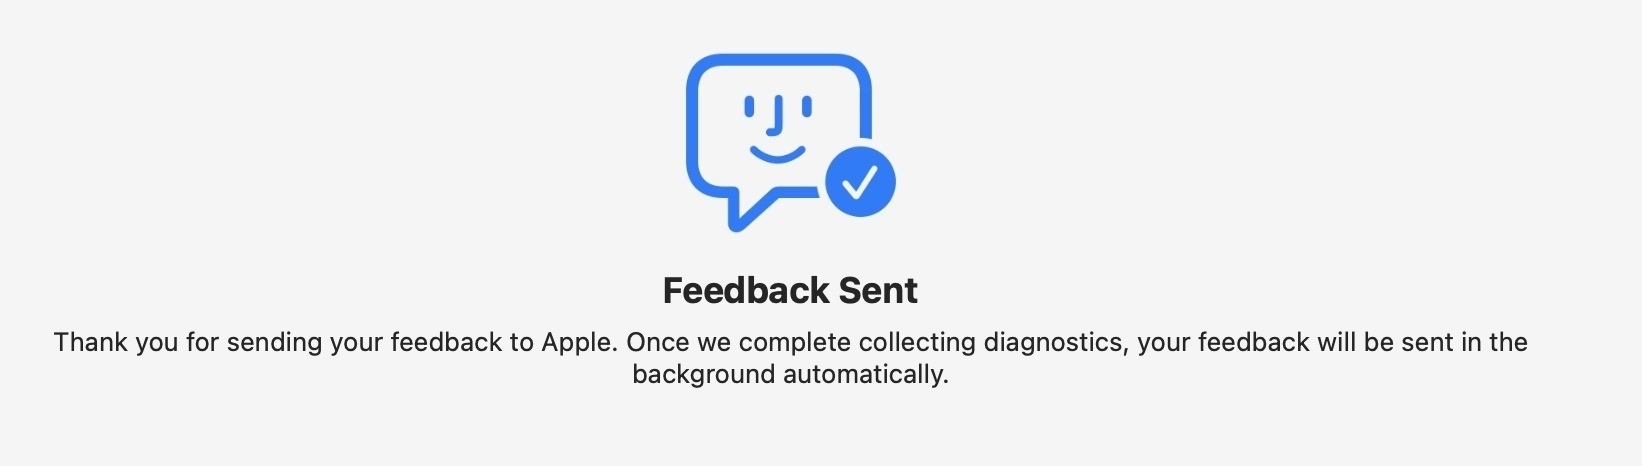 Screenshot of "Feedback Sent" confirmation indicating it will be submitted when the system diagnostics are complete.